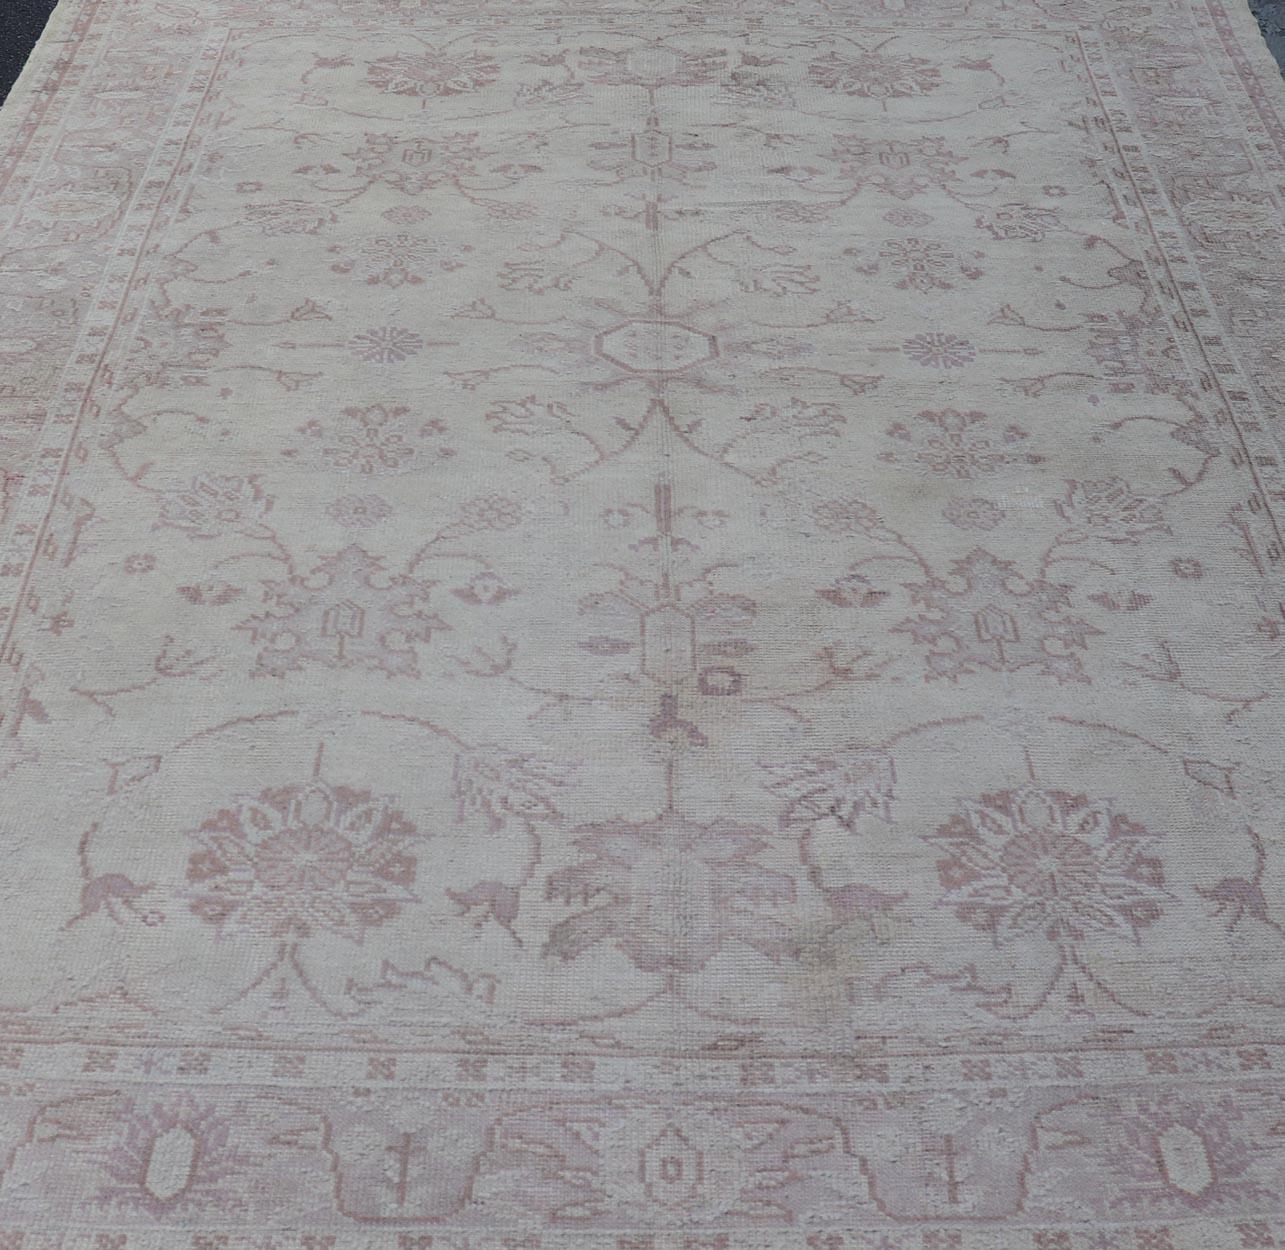 Mid-20th Century Antique Turkish Oushak Rug with Floral Patterns in Cream and Neutral Colors  For Sale